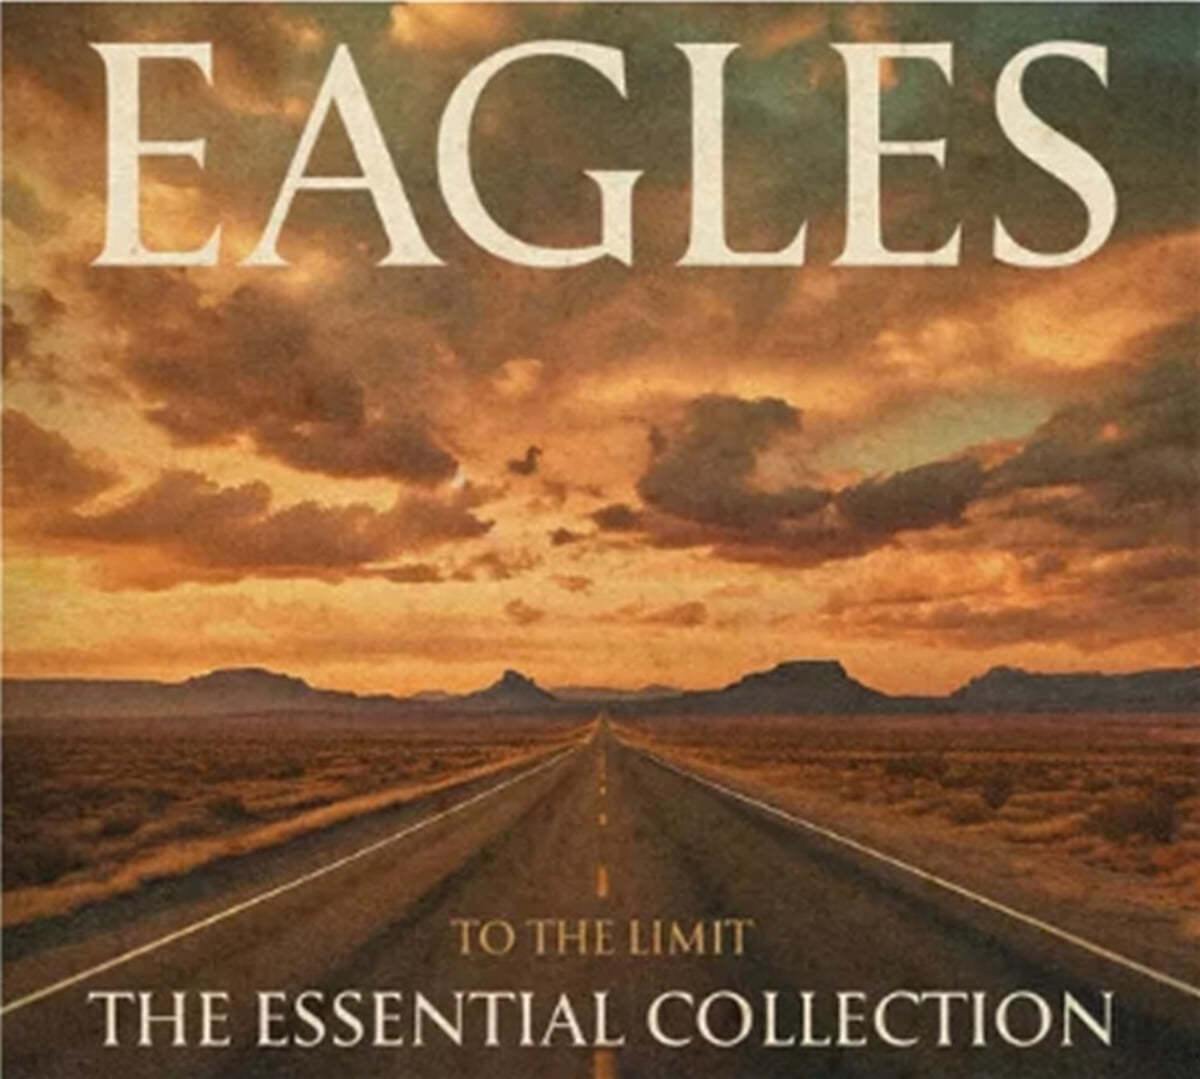 Eagles (이글스) - To the Limit : The Essential Collection 